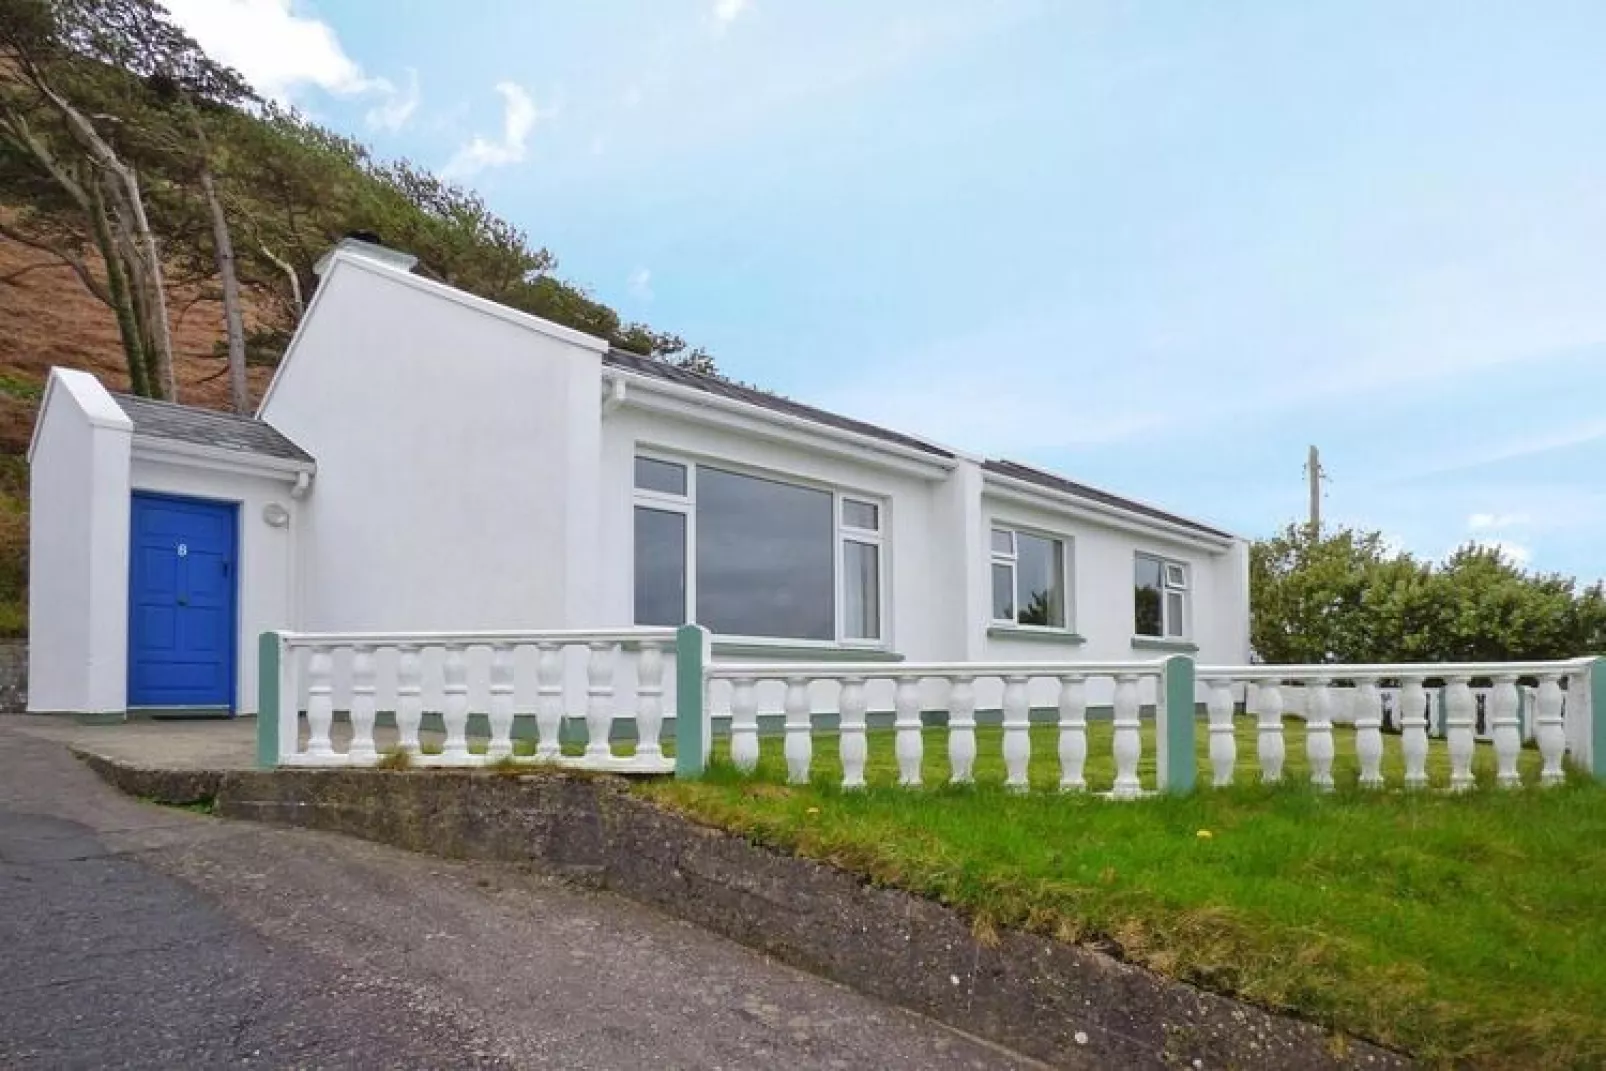 Rossbeigh Beach Holiday Cottages in Glenbeigh Co Kerry-Buitenkant zomer